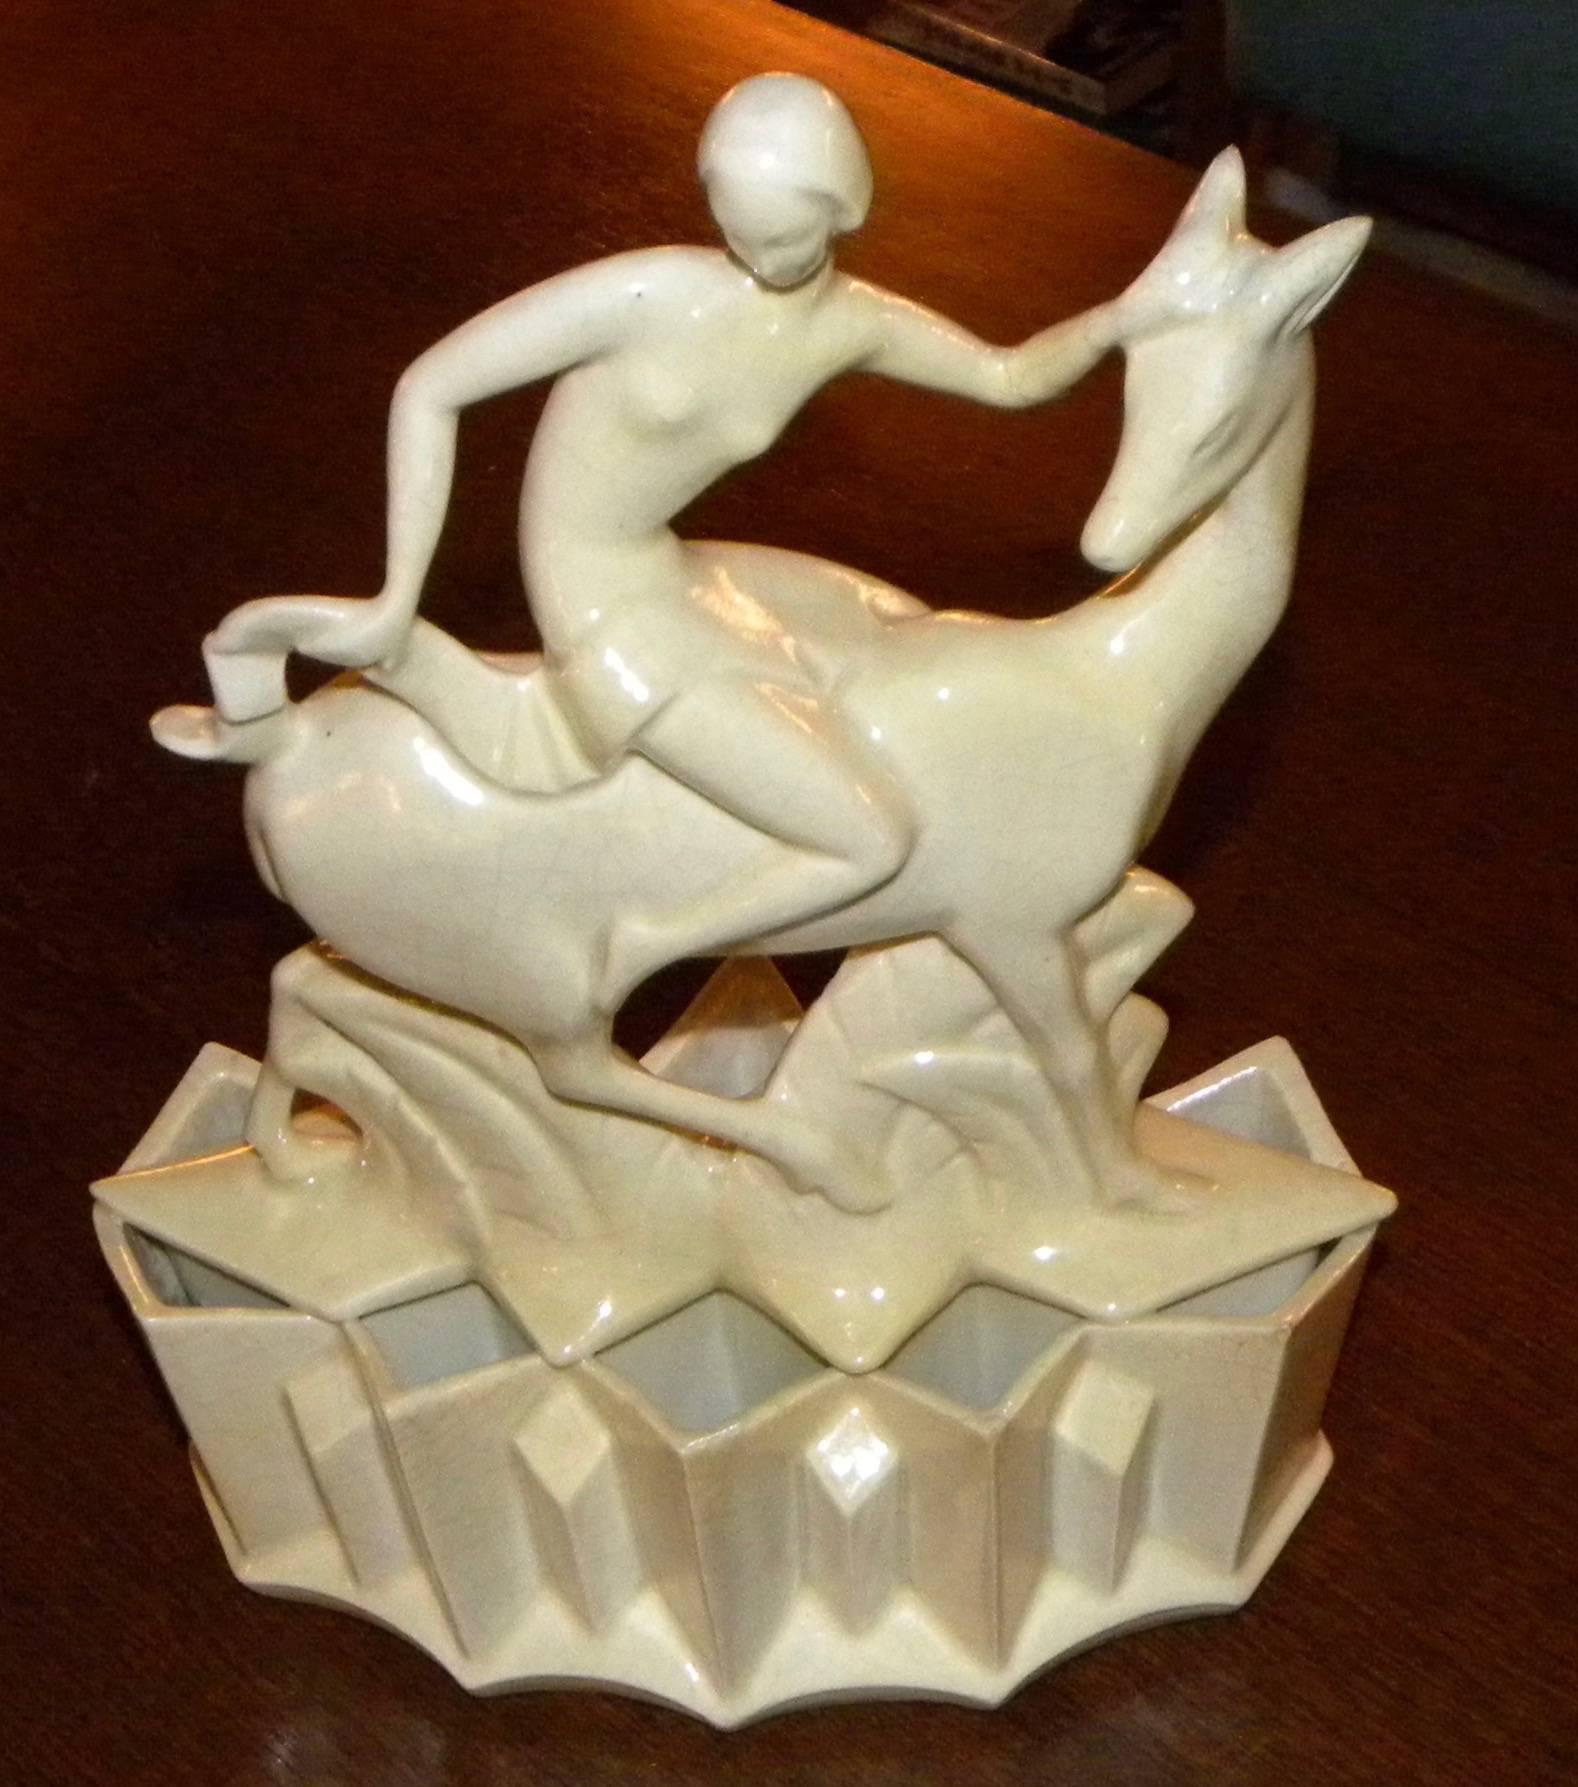 This stunning French crackle-glazed cubist figure is compelling and unique. The stylized female form sitting on top of the stylized antelope is supported by a sculpted geometric base. This piece has all the earmarks of a great European inspired